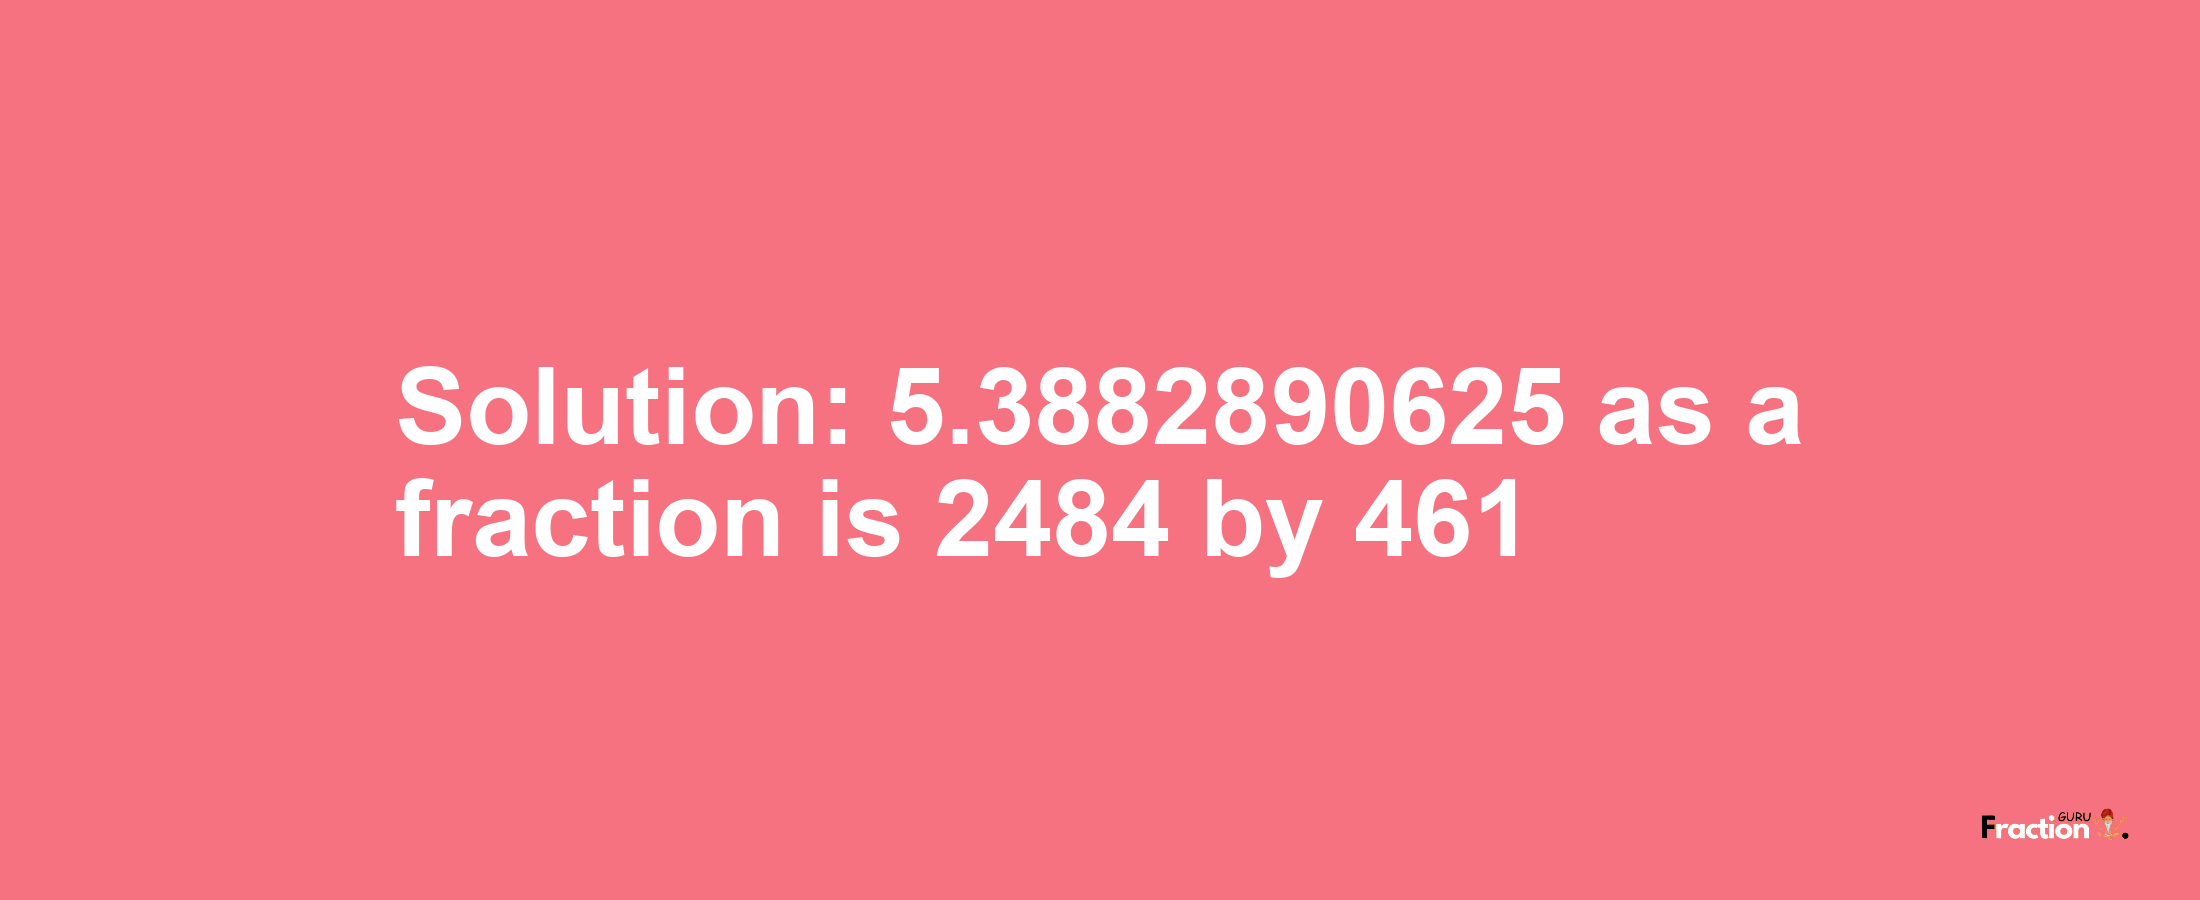 Solution:5.3882890625 as a fraction is 2484/461